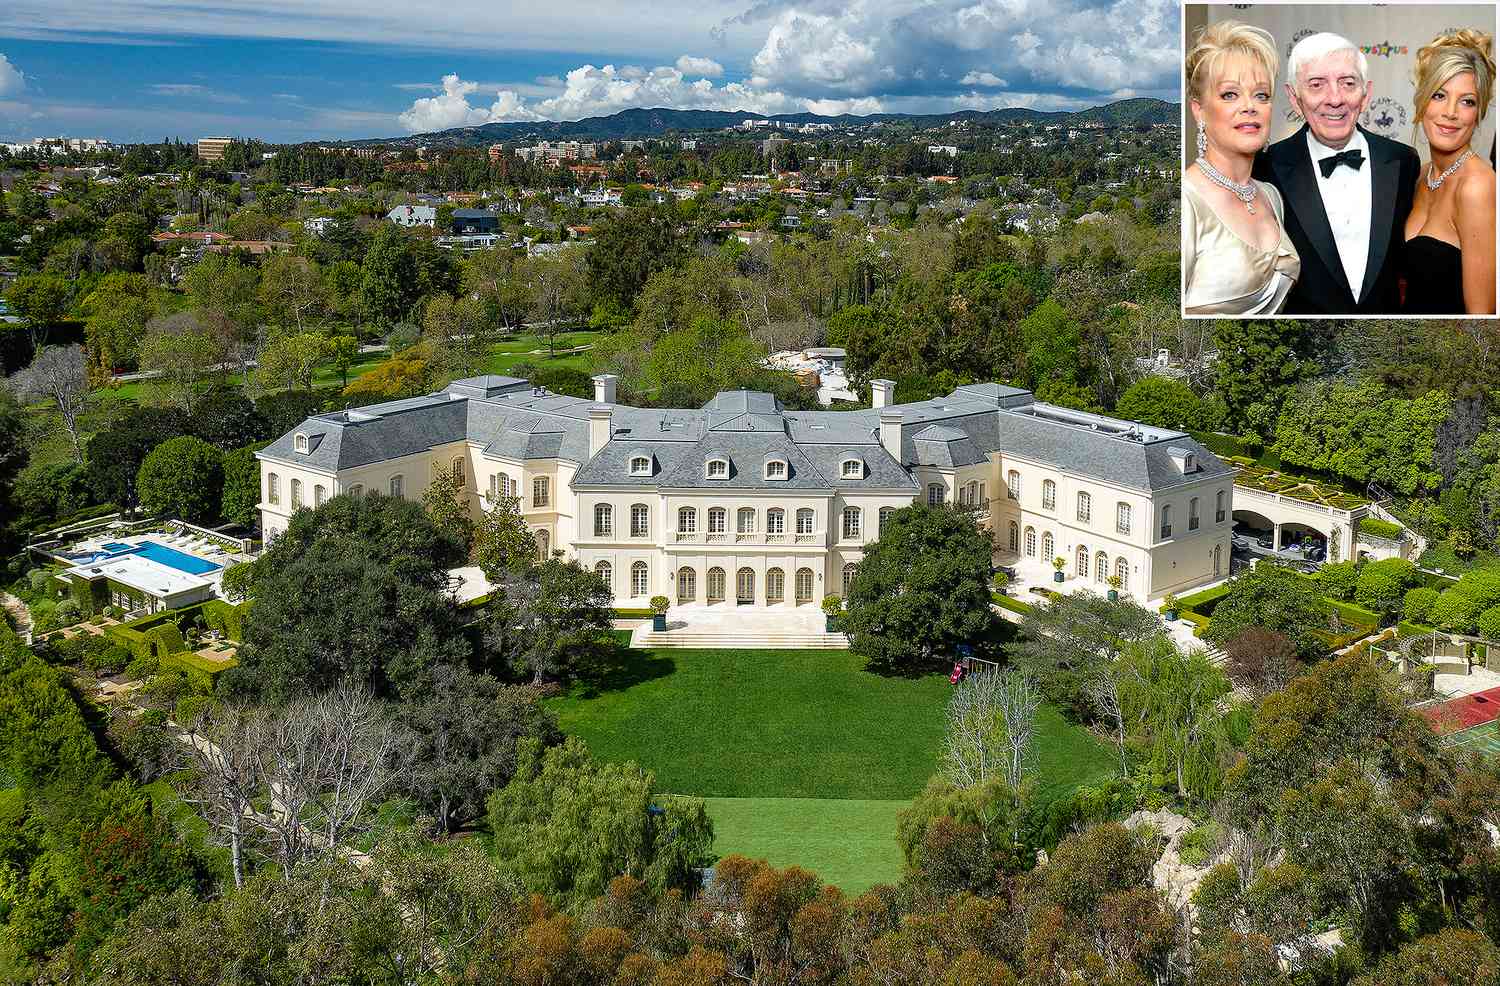 See Inside the Spelling Family's Former Mansion — Now Listed for $160 Million